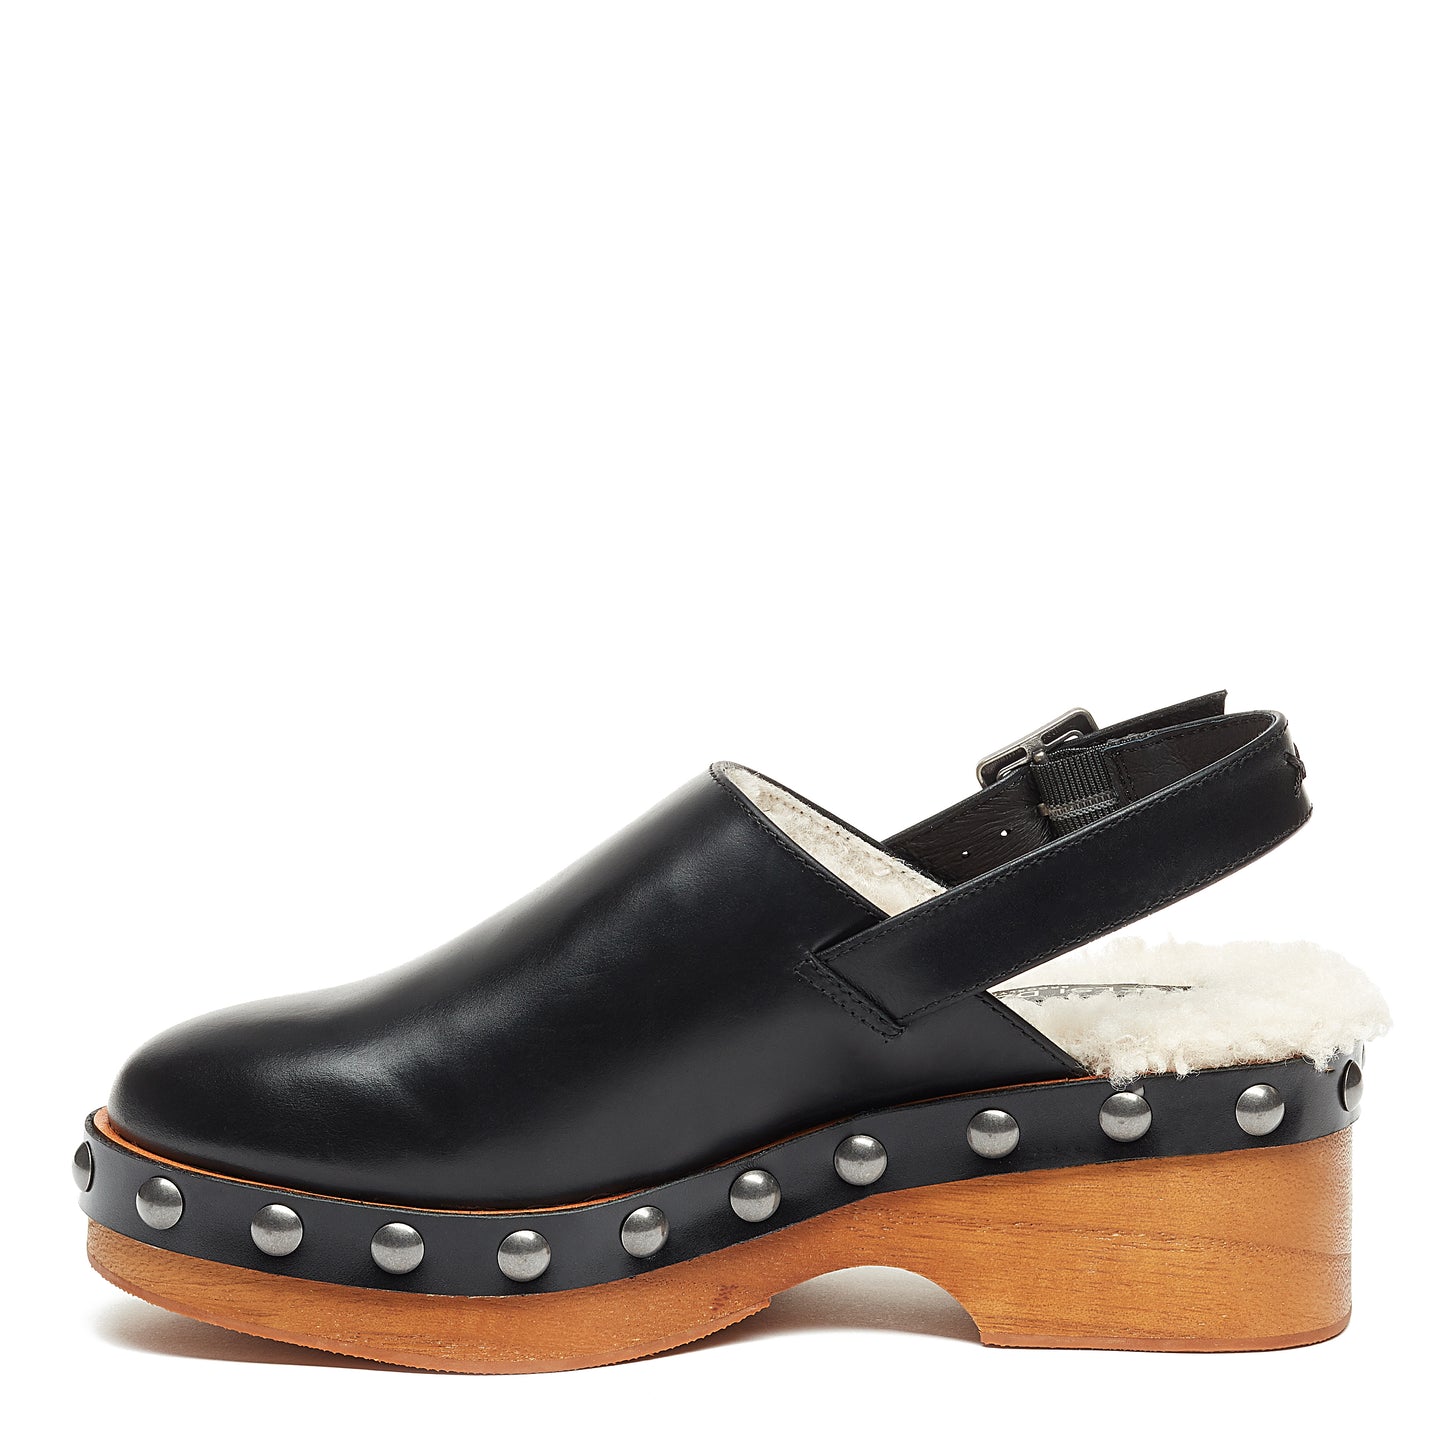 Warehouse Black Leather Shearling Clog